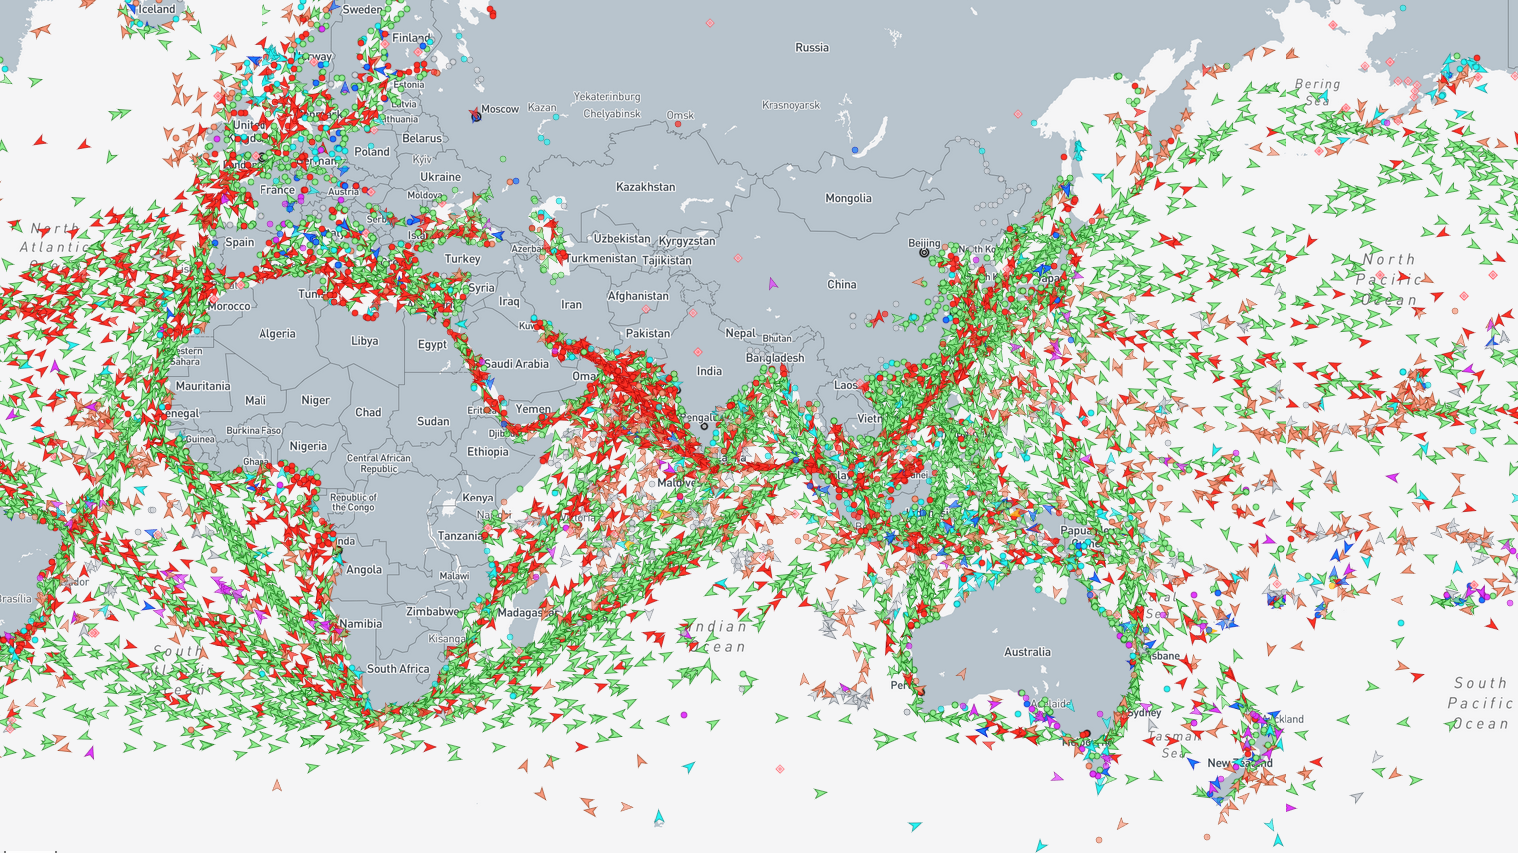 Screenshot of marinetraffic.com showing the thousands of ships on the ocean